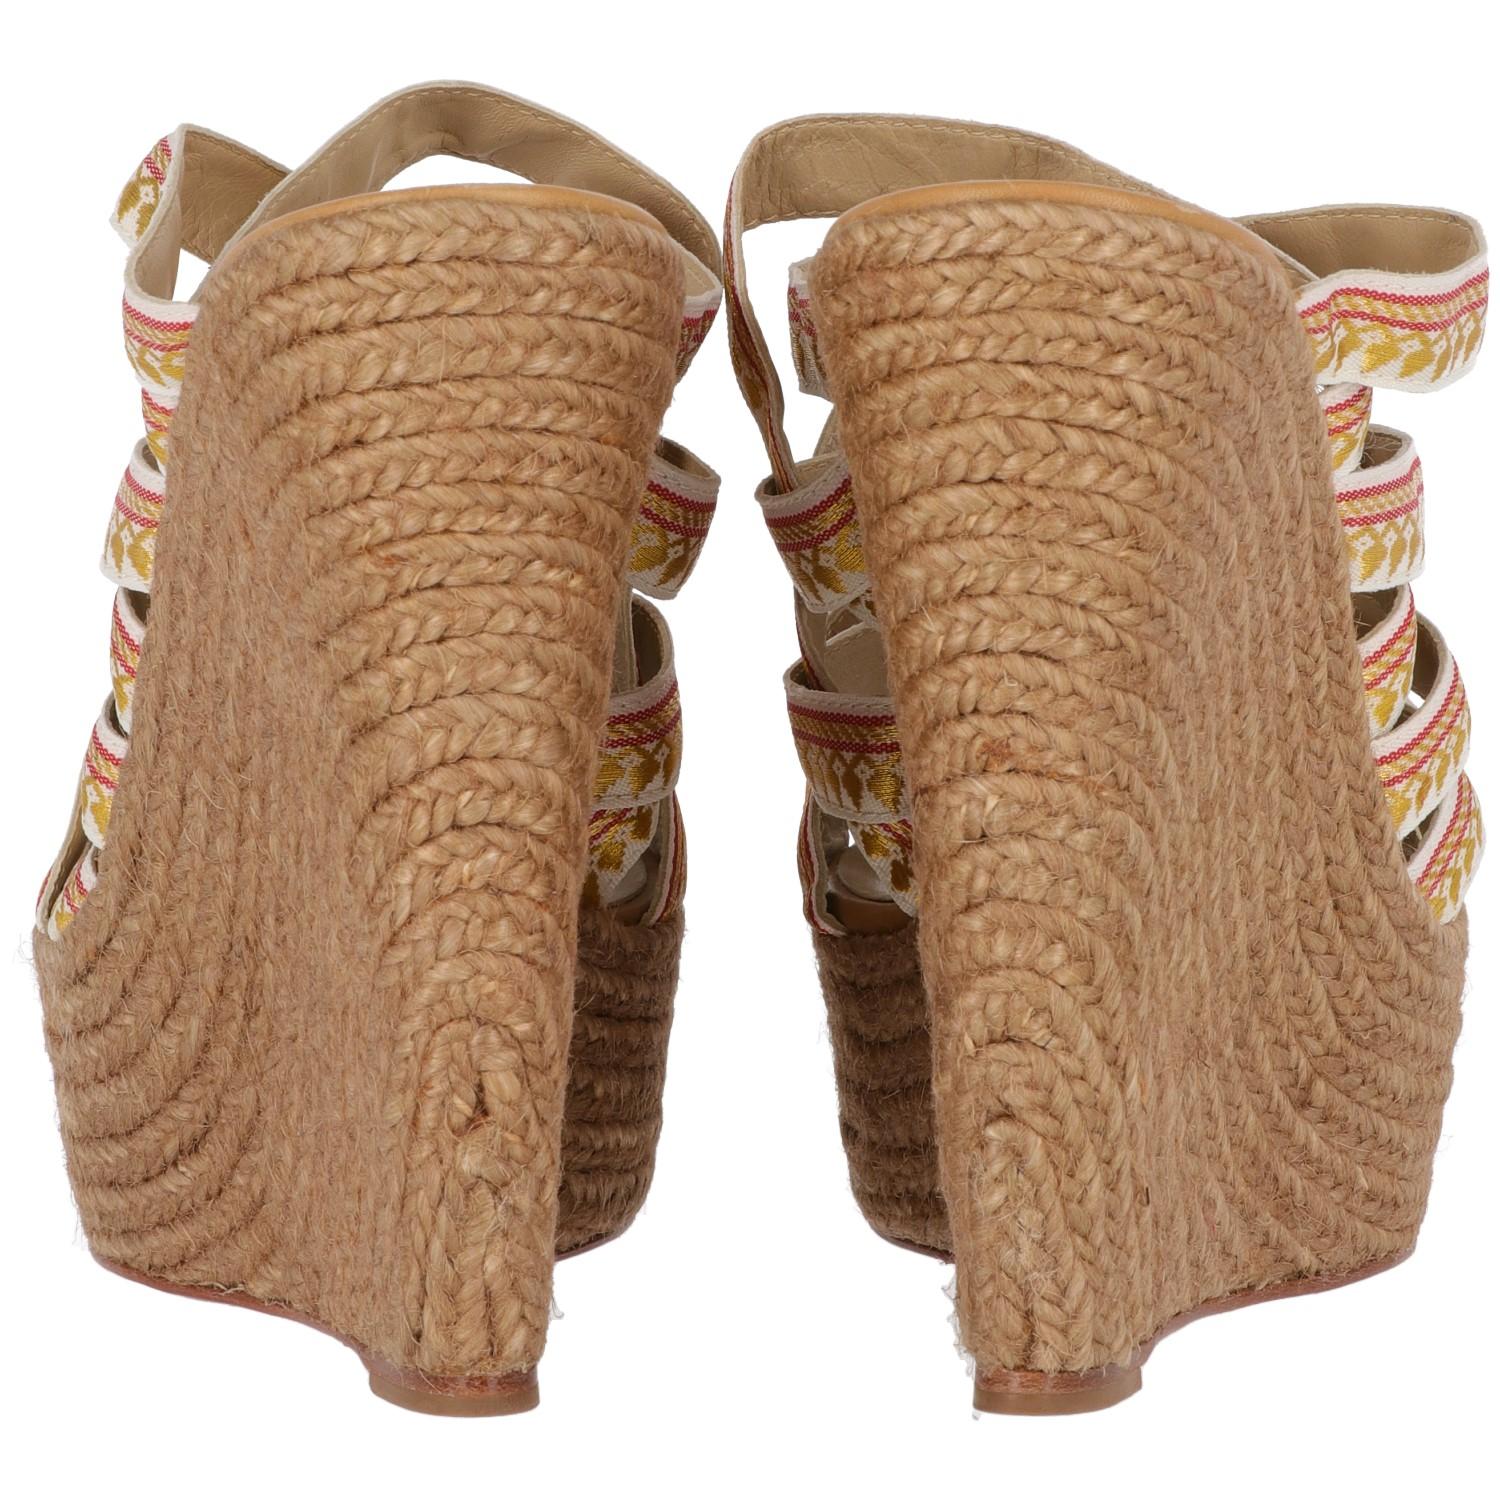 2010s Christian Louboutin Espadrilles In Excellent Condition For Sale In Lugo (RA), IT